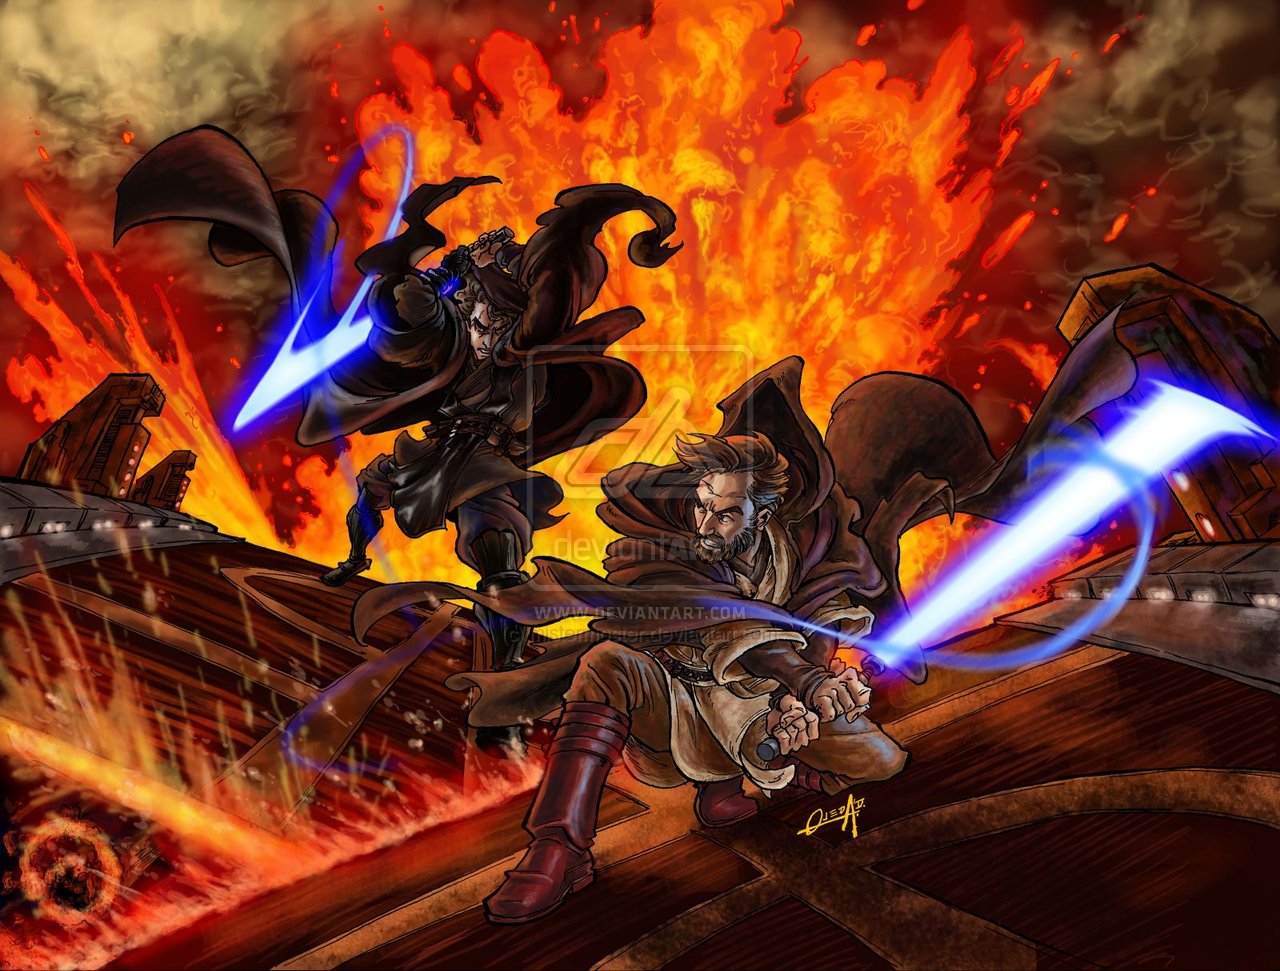 Obi wan vs Anakin by mistermoster on